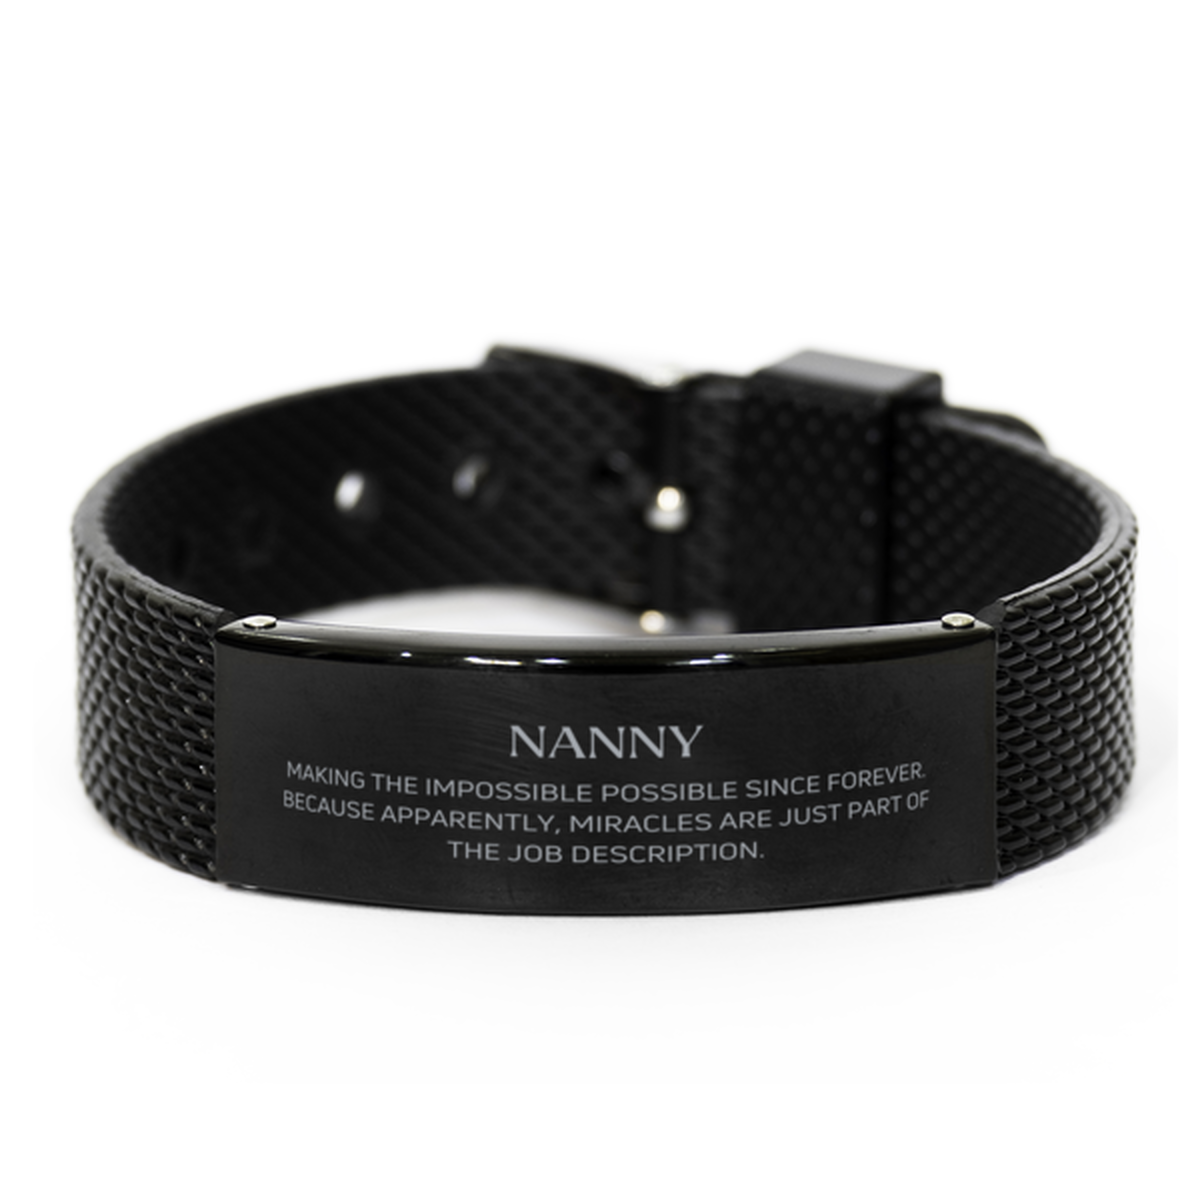 Funny Nanny Gifts, Miracles are just part of the job description, Inspirational Birthday Black Shark Mesh Bracelet For Nanny, Men, Women, Coworkers, Friends, Boss